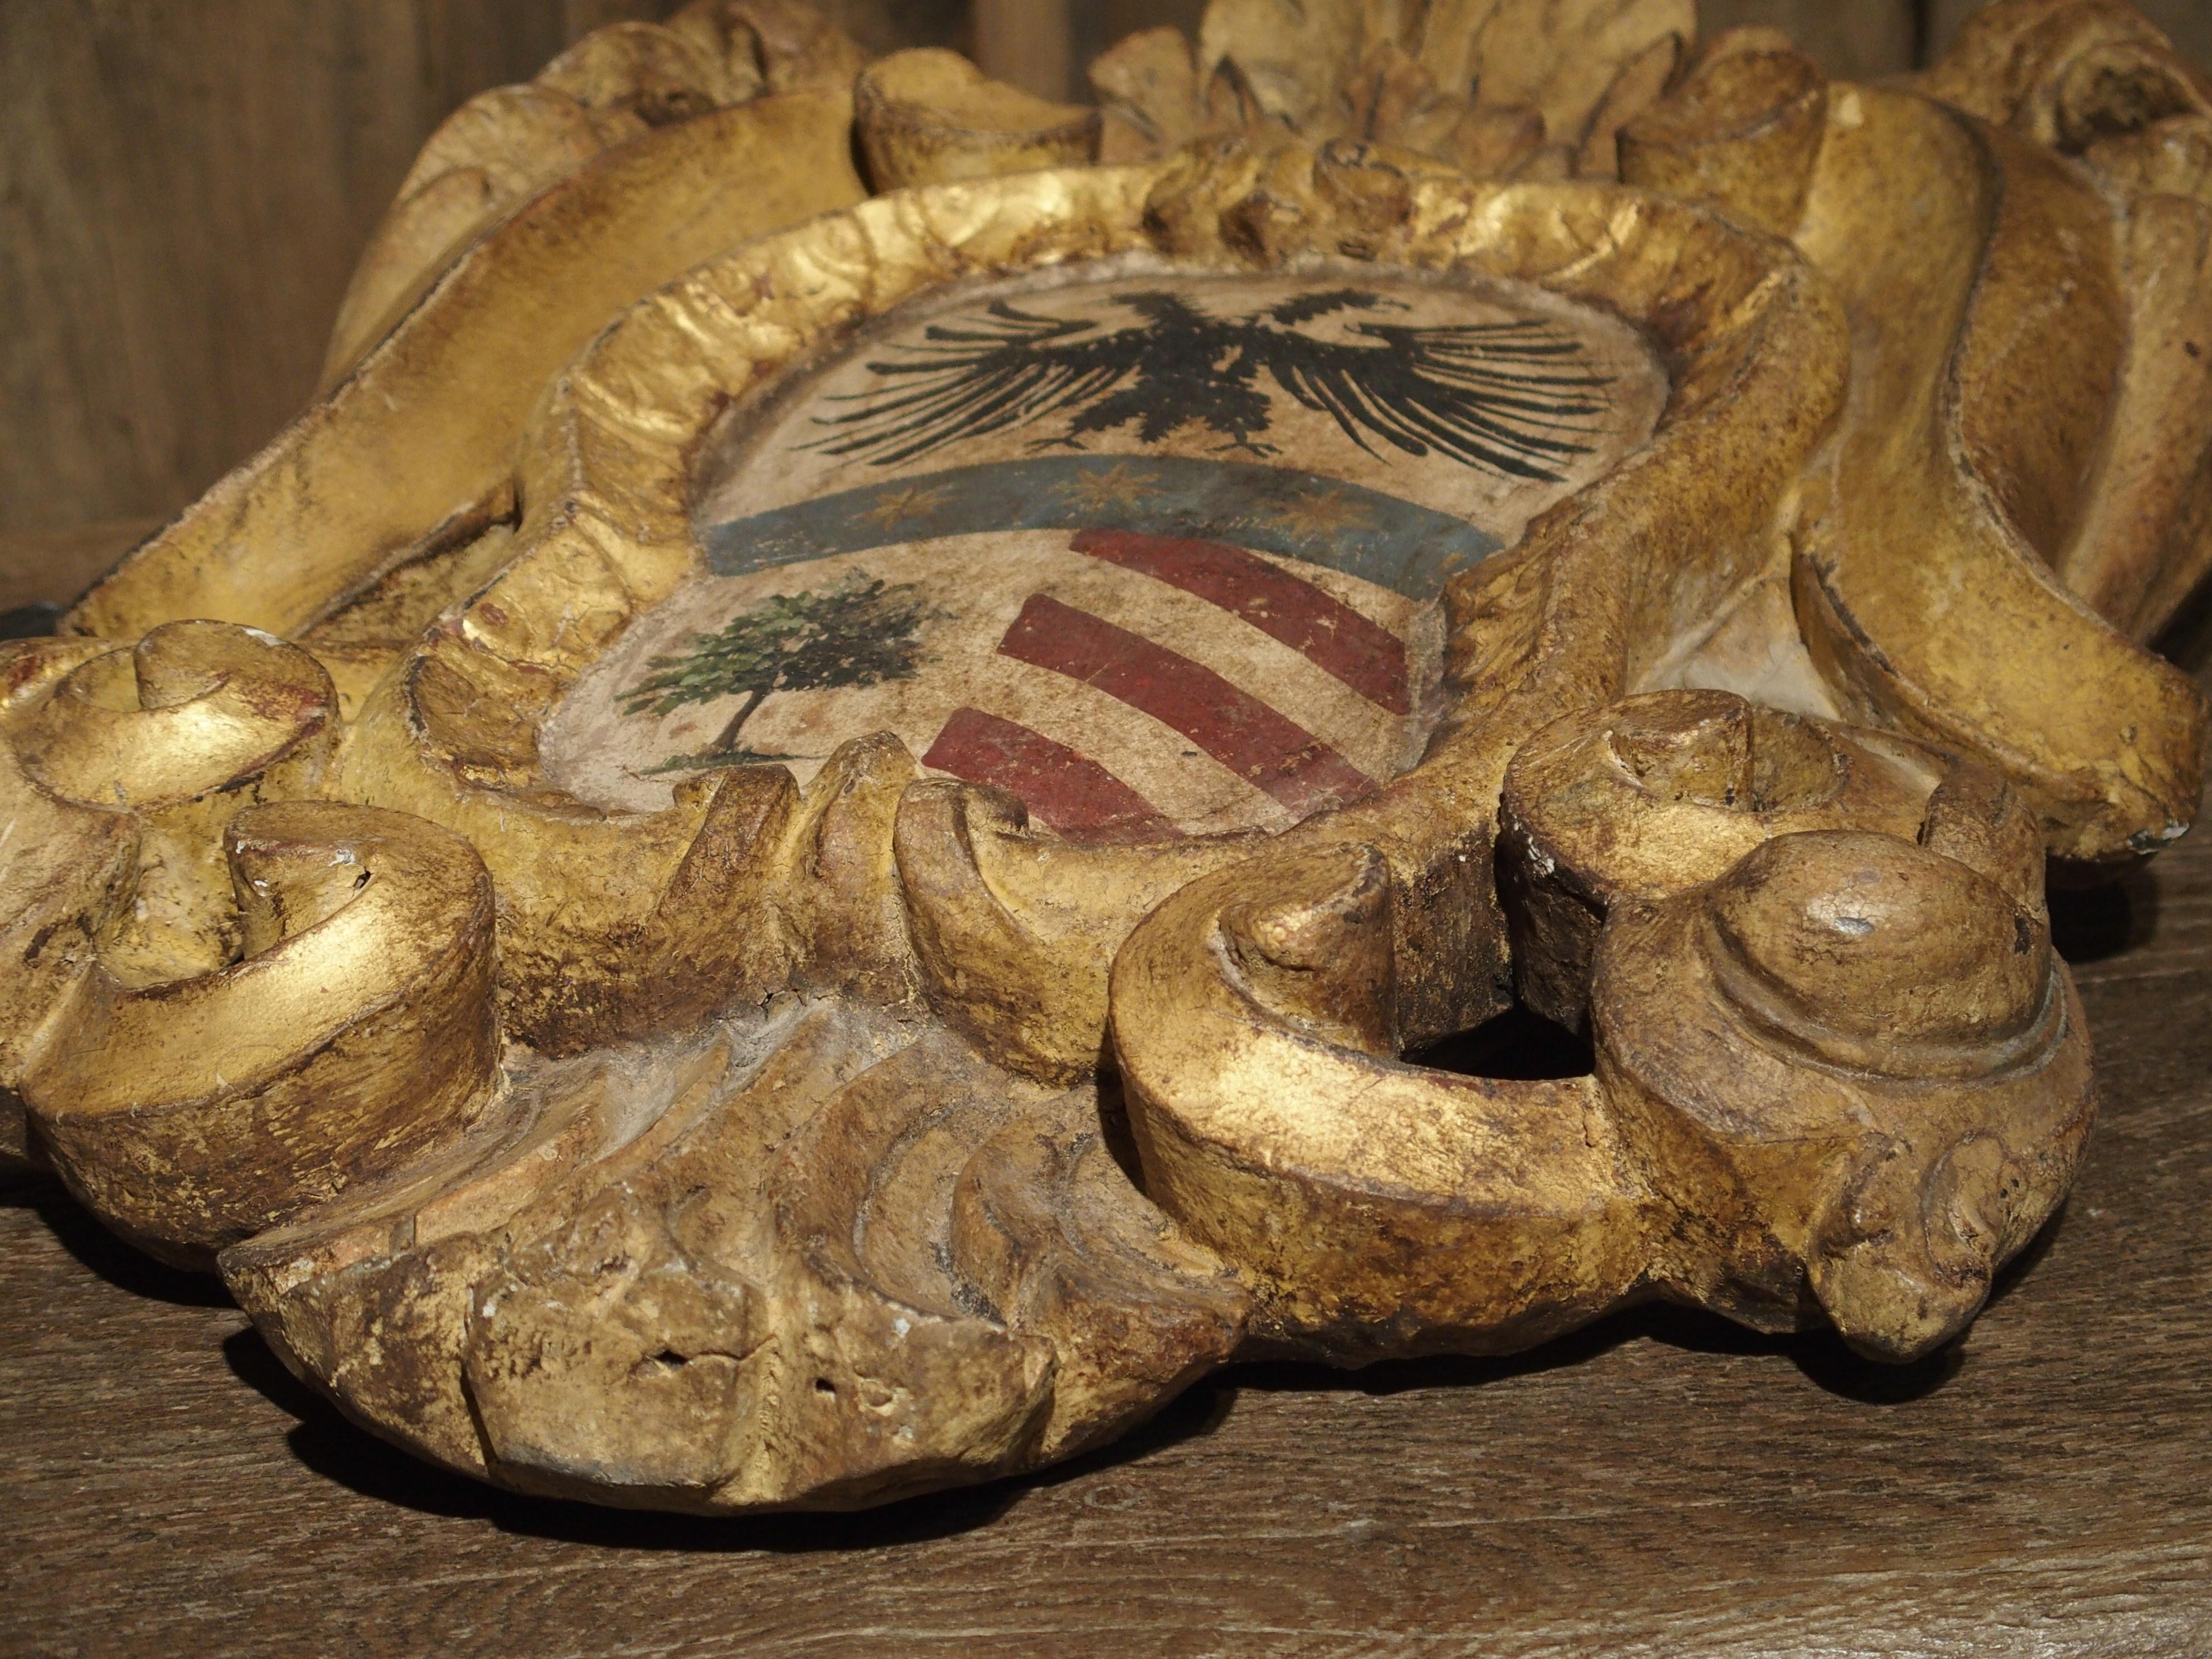 From the 1700’s, this hand carved giltwood and polychrome wooden plaque on stand is from Northern Italy. The subject is an Italian coat of arms surrounded by an acanthus leaf cartouche. There are graceful C-and S-Scrolls in the cartouche that